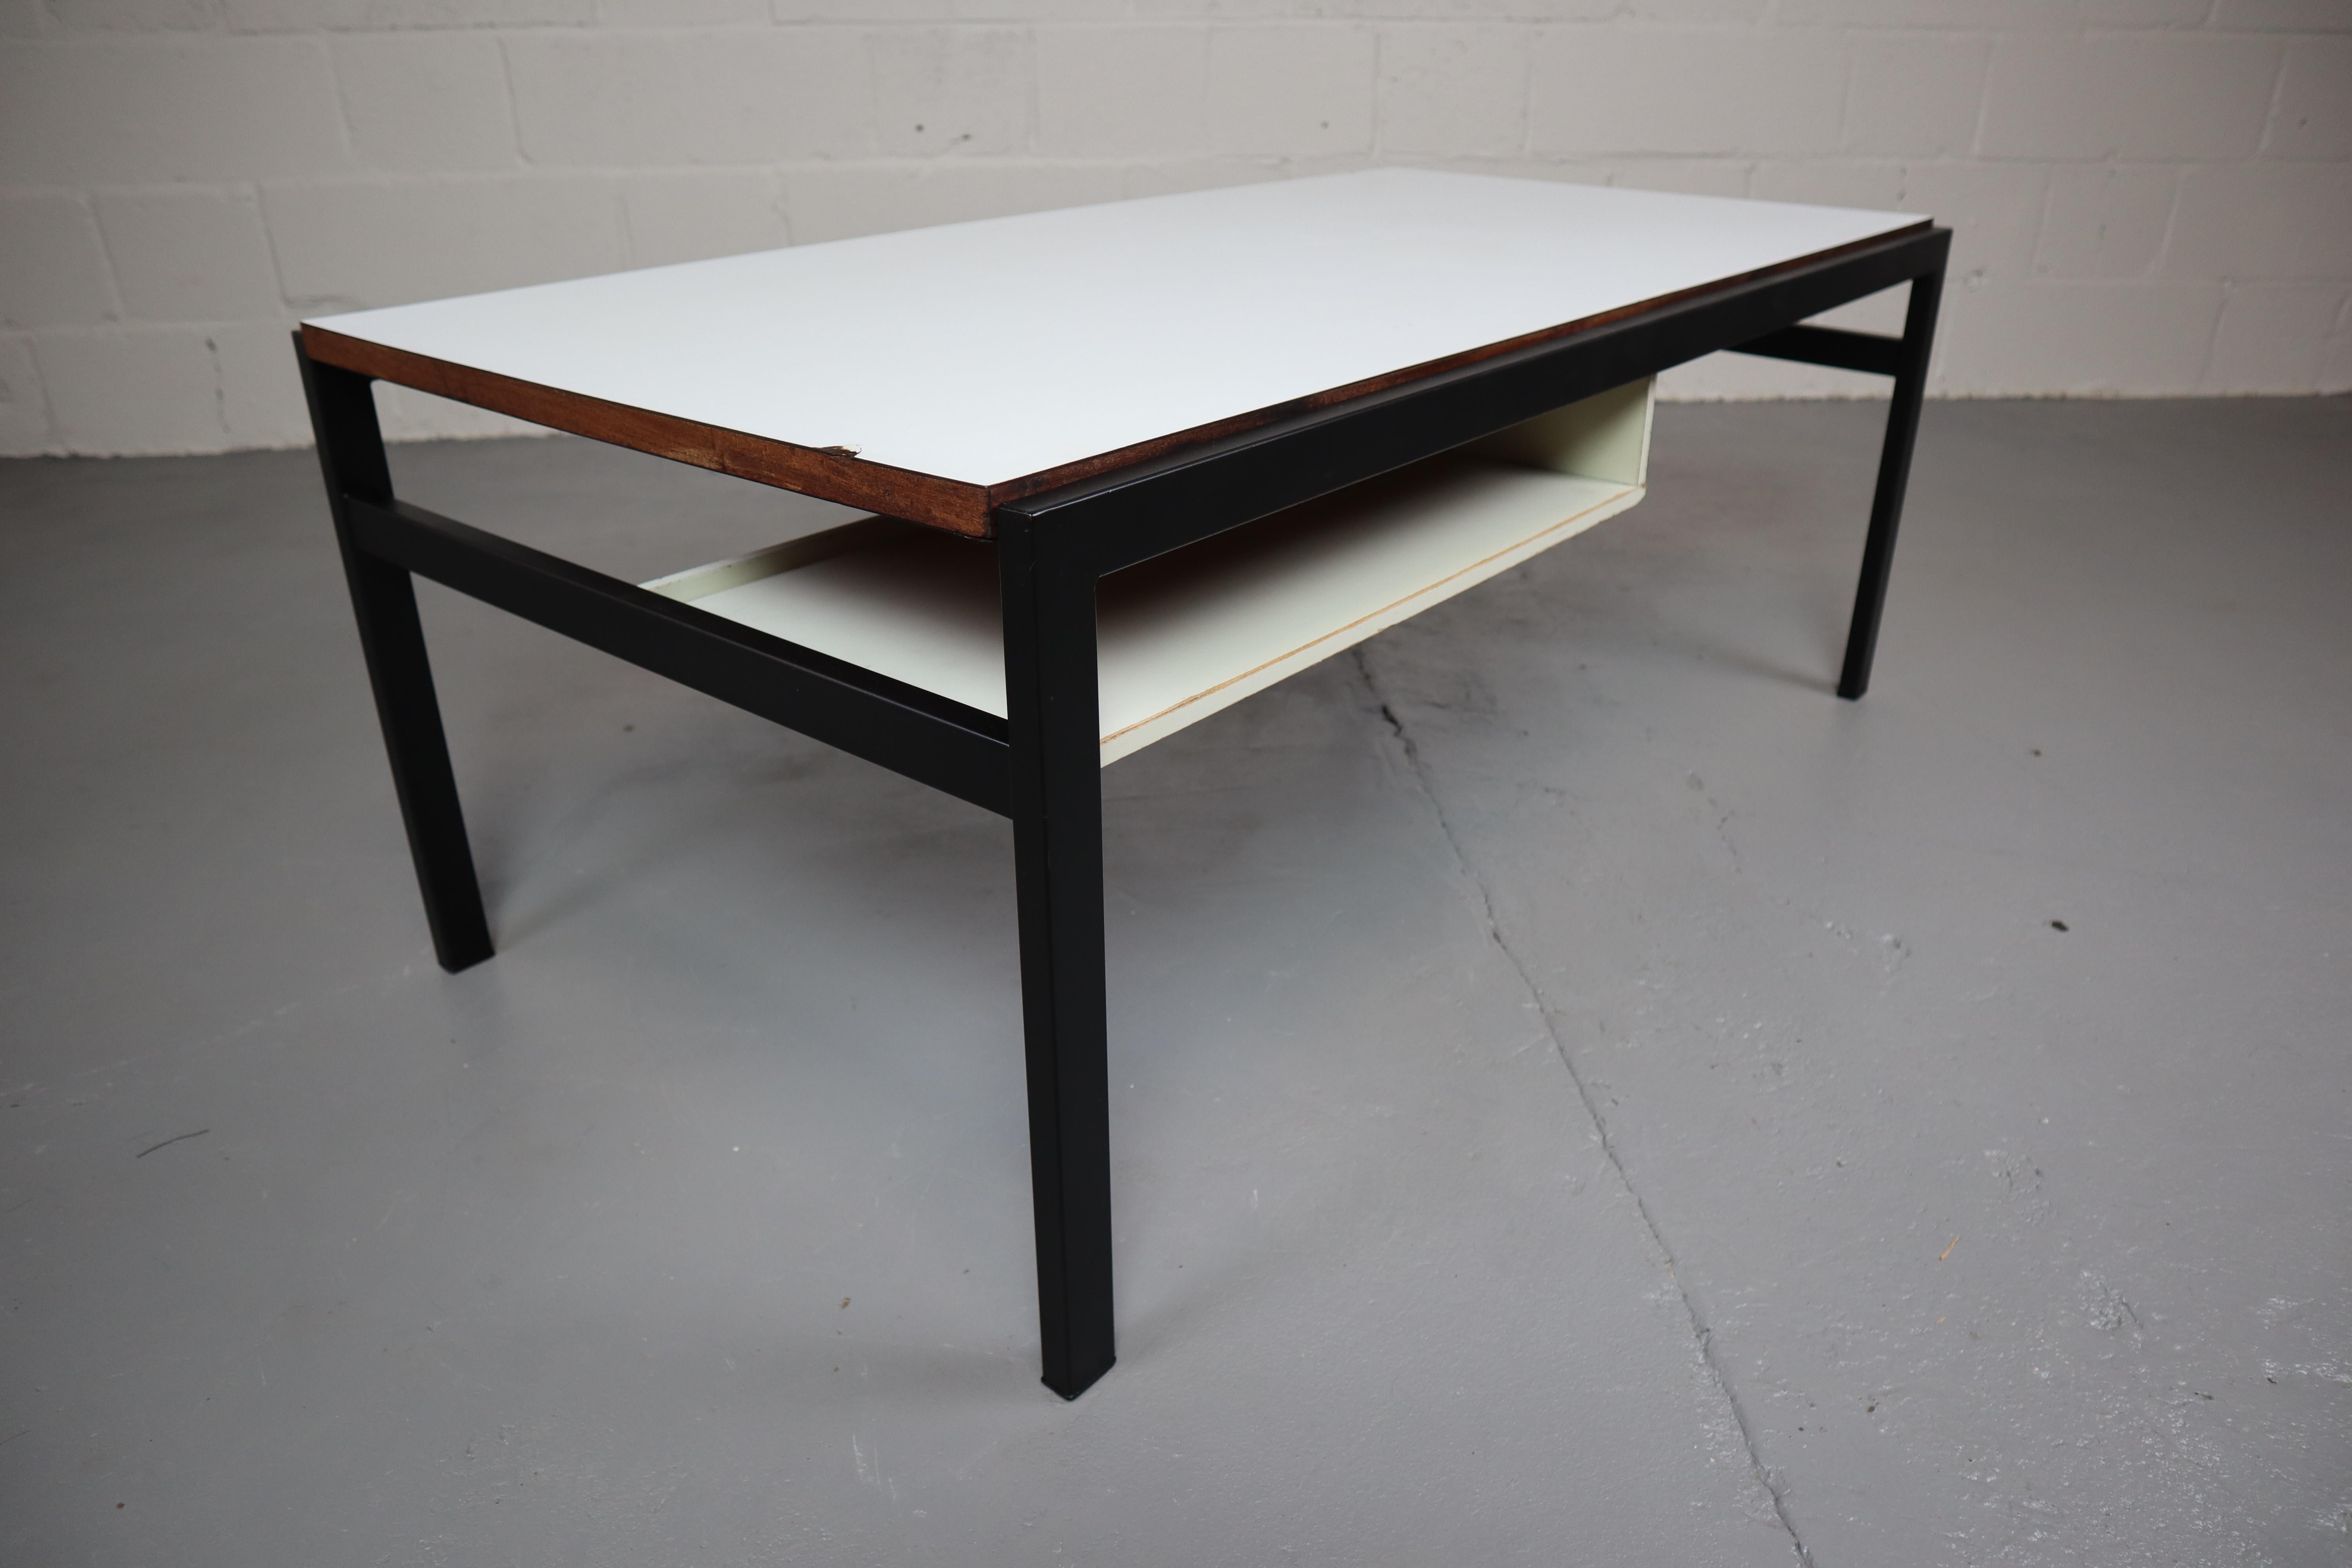 Coffee table TU04 designed by Cees Braakman for Pastoe in the 1950s.
This table has a reversible table top (teak or formica side), black metal legs and a floating magazine holder under the table top.
The table is part of the Japanese